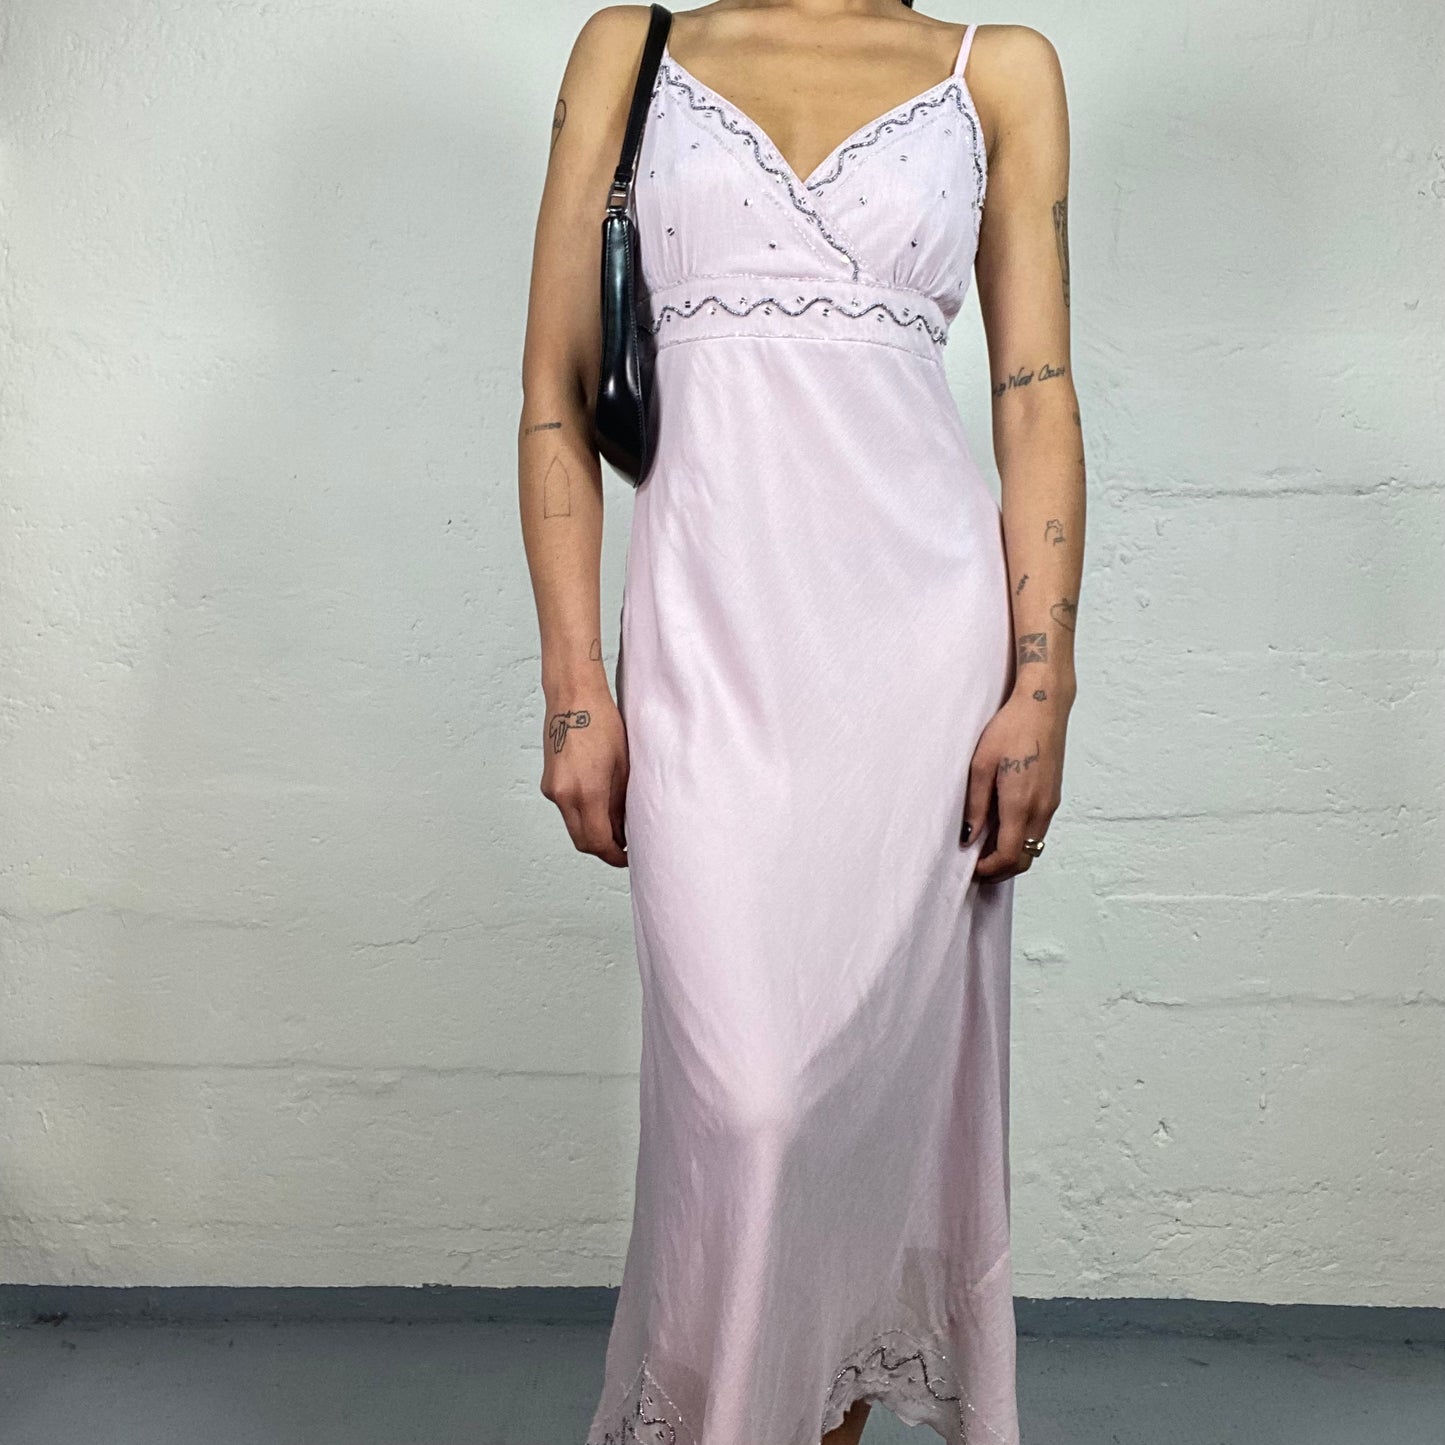 Vintage 2000's Princess Soft Pink Light Maxi Cami Dress with Sequin Embroidery (M)